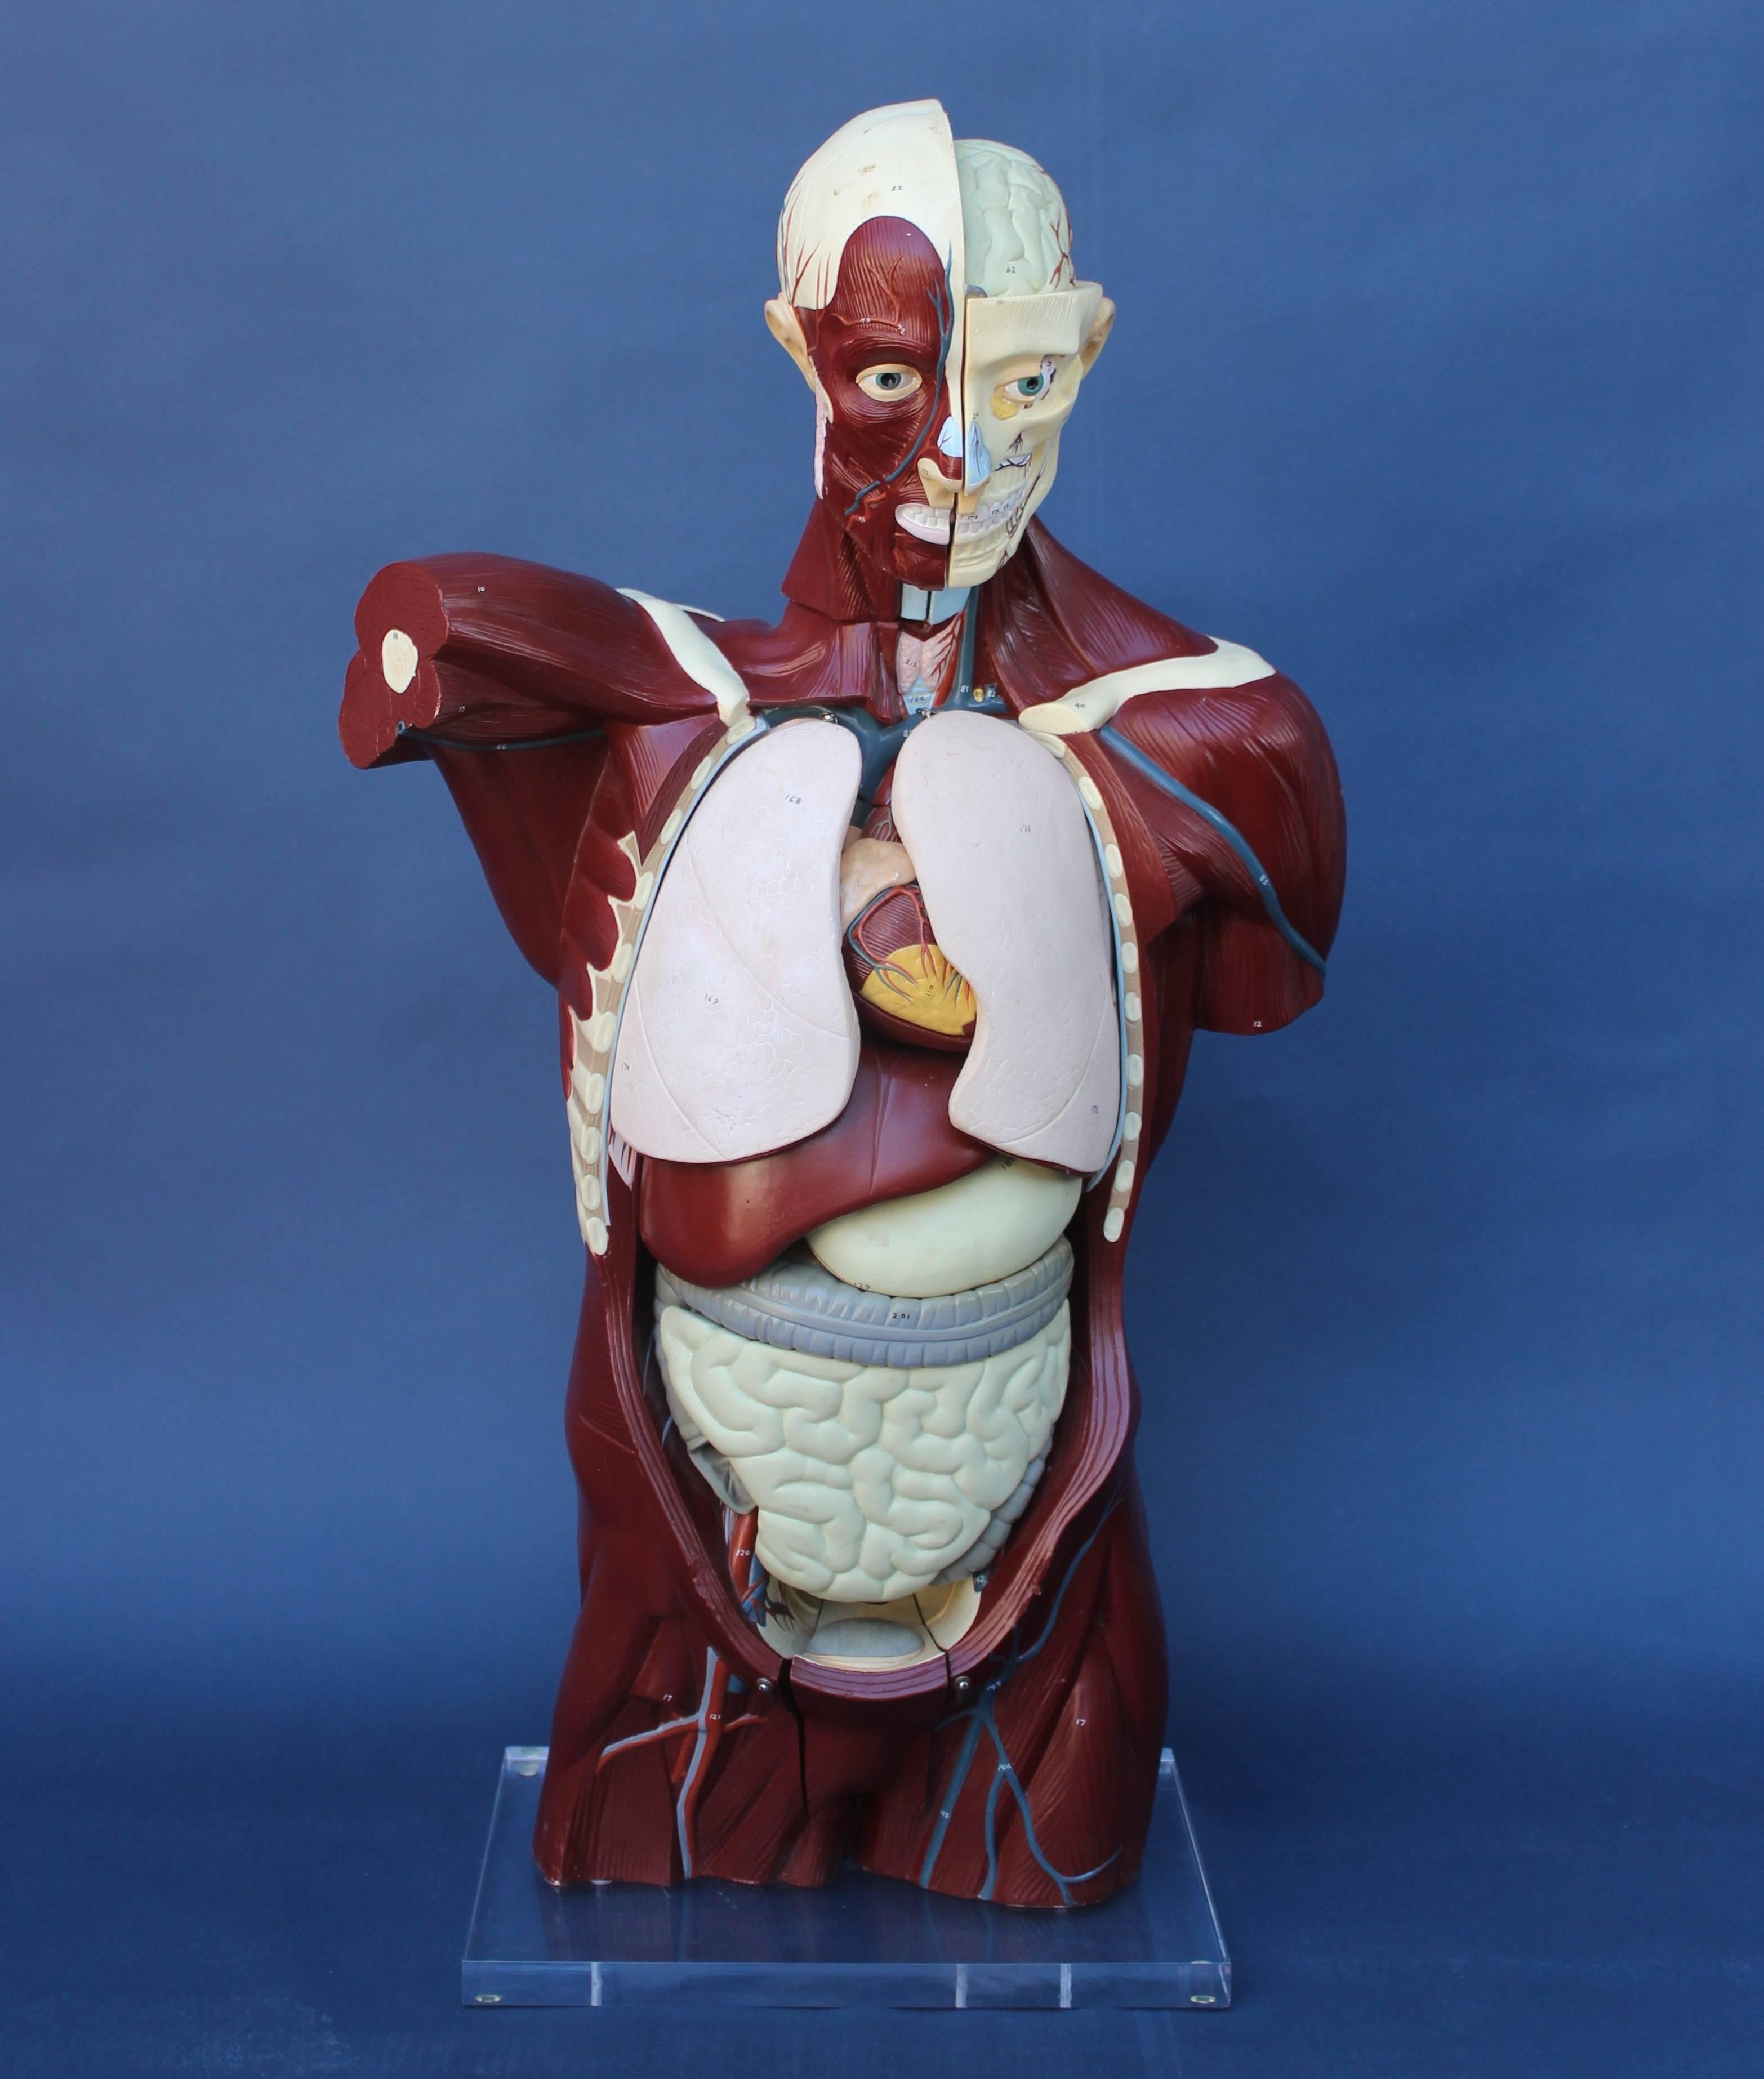 Life-size anatomical model on Lucite base...
all the individual organs hang in torso...
a great learning device and conversation piece...